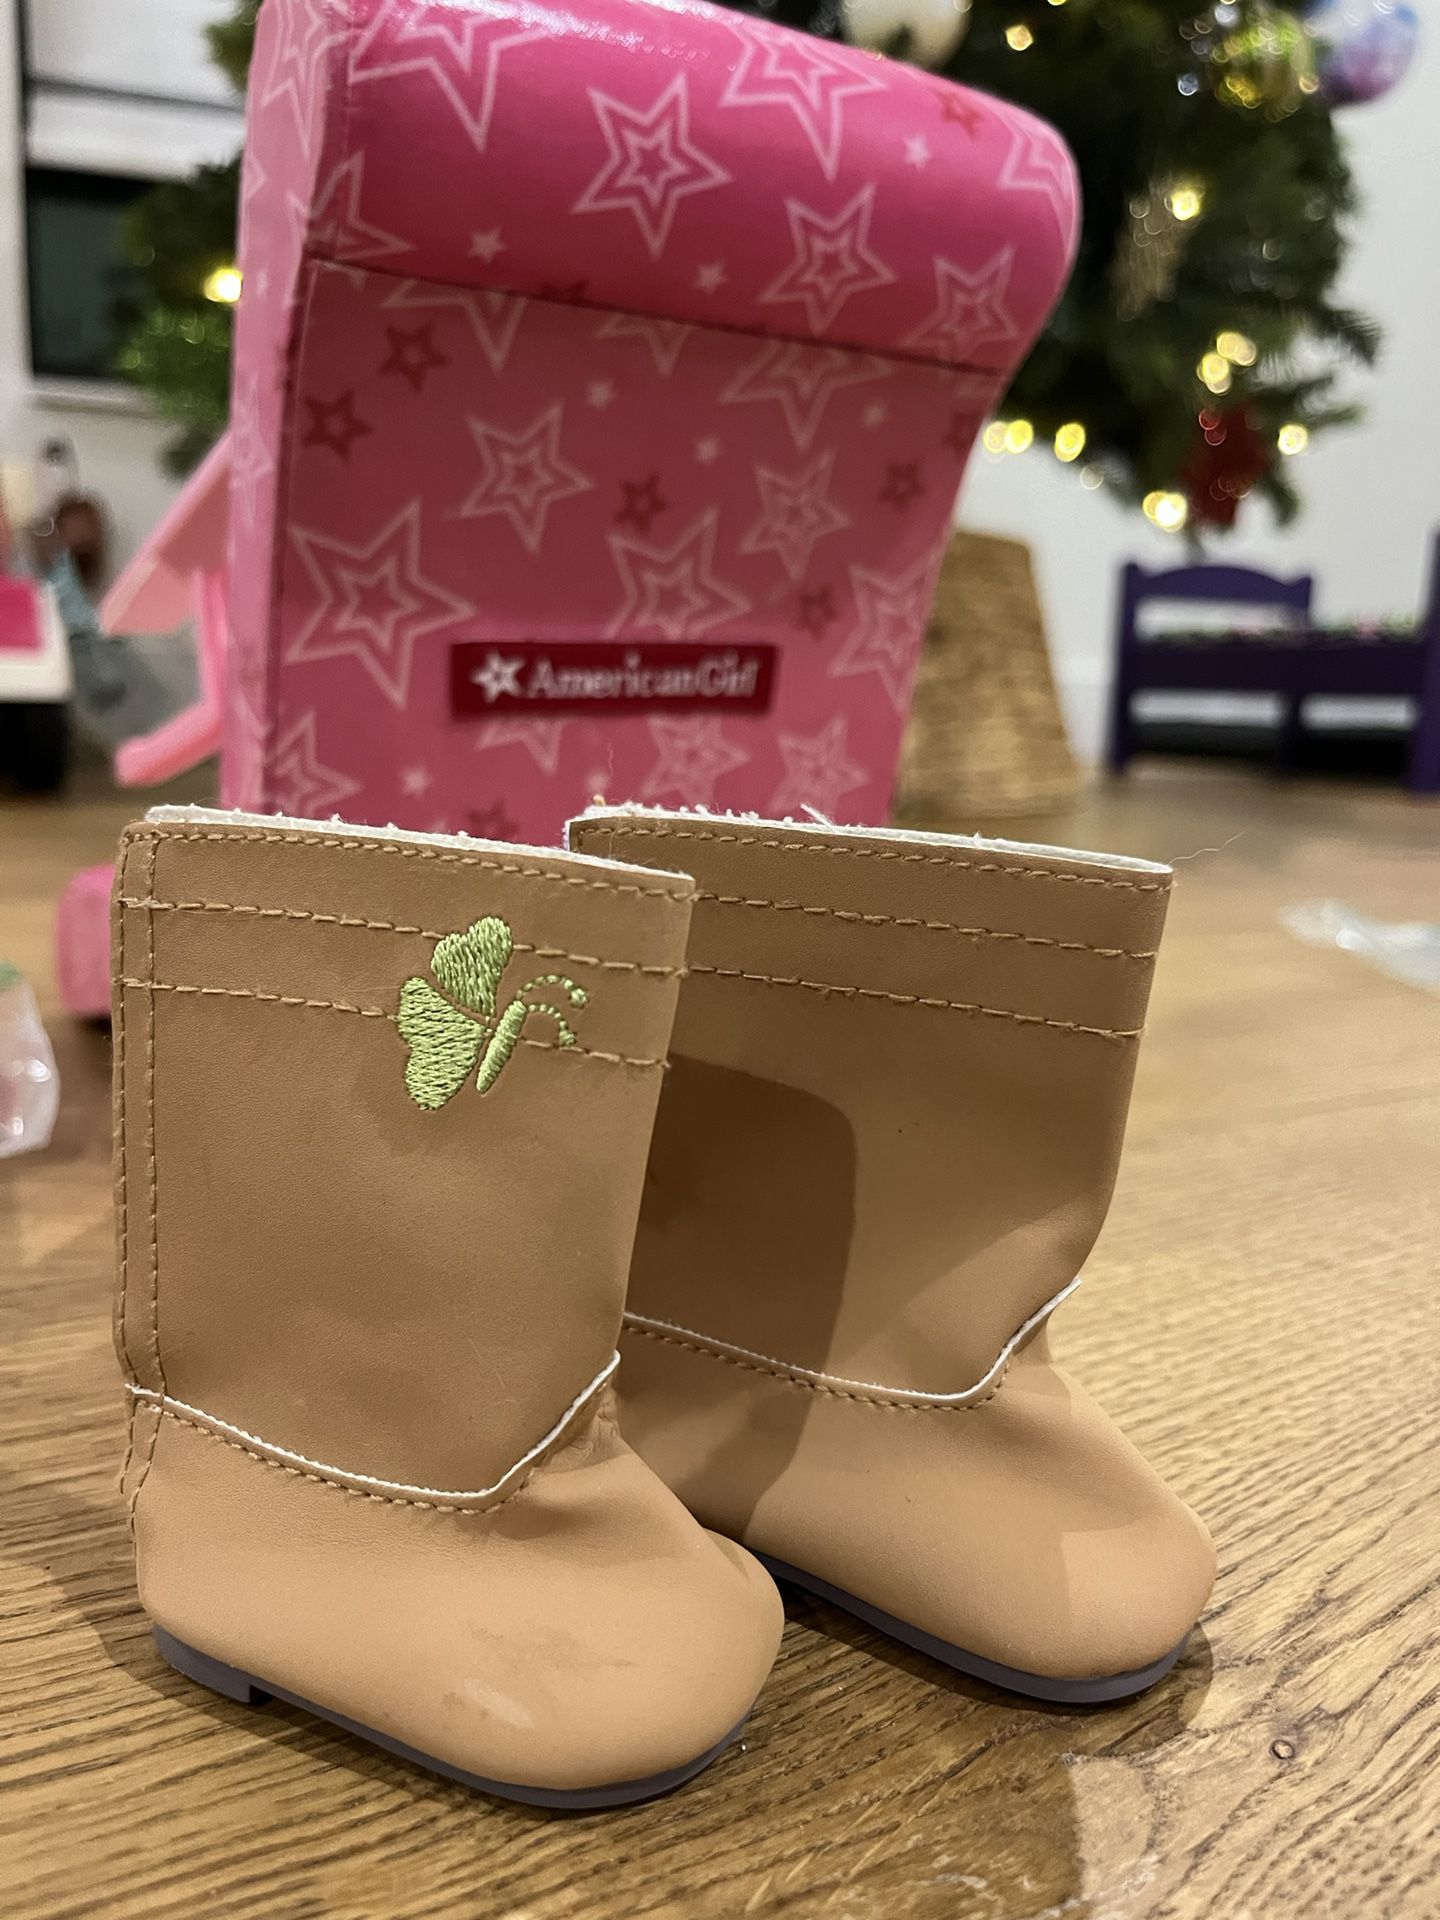 American Girl Doll Boots